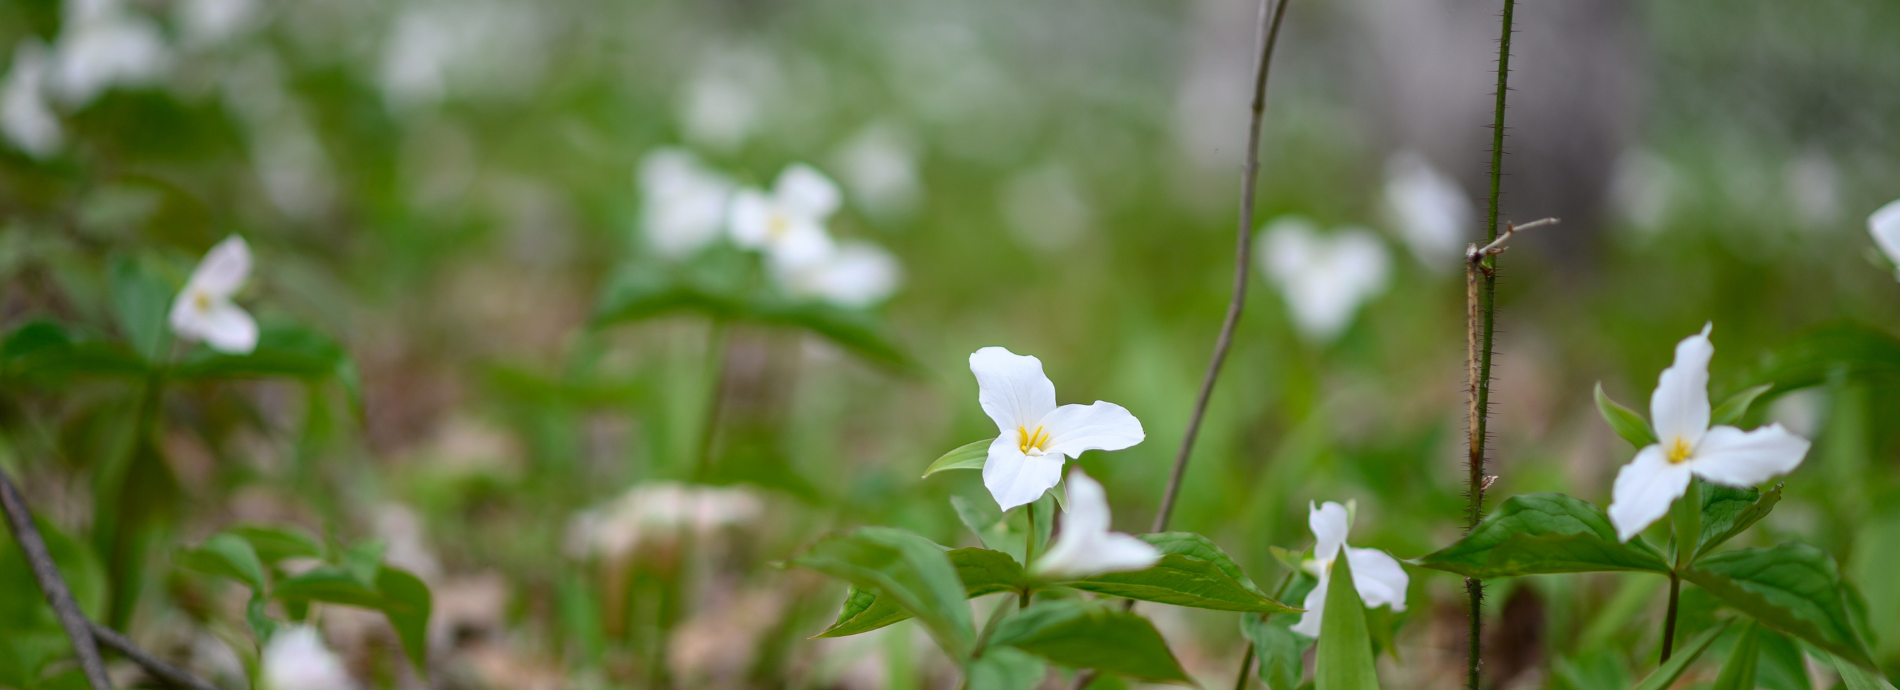 trilliums in bloom on forest floor